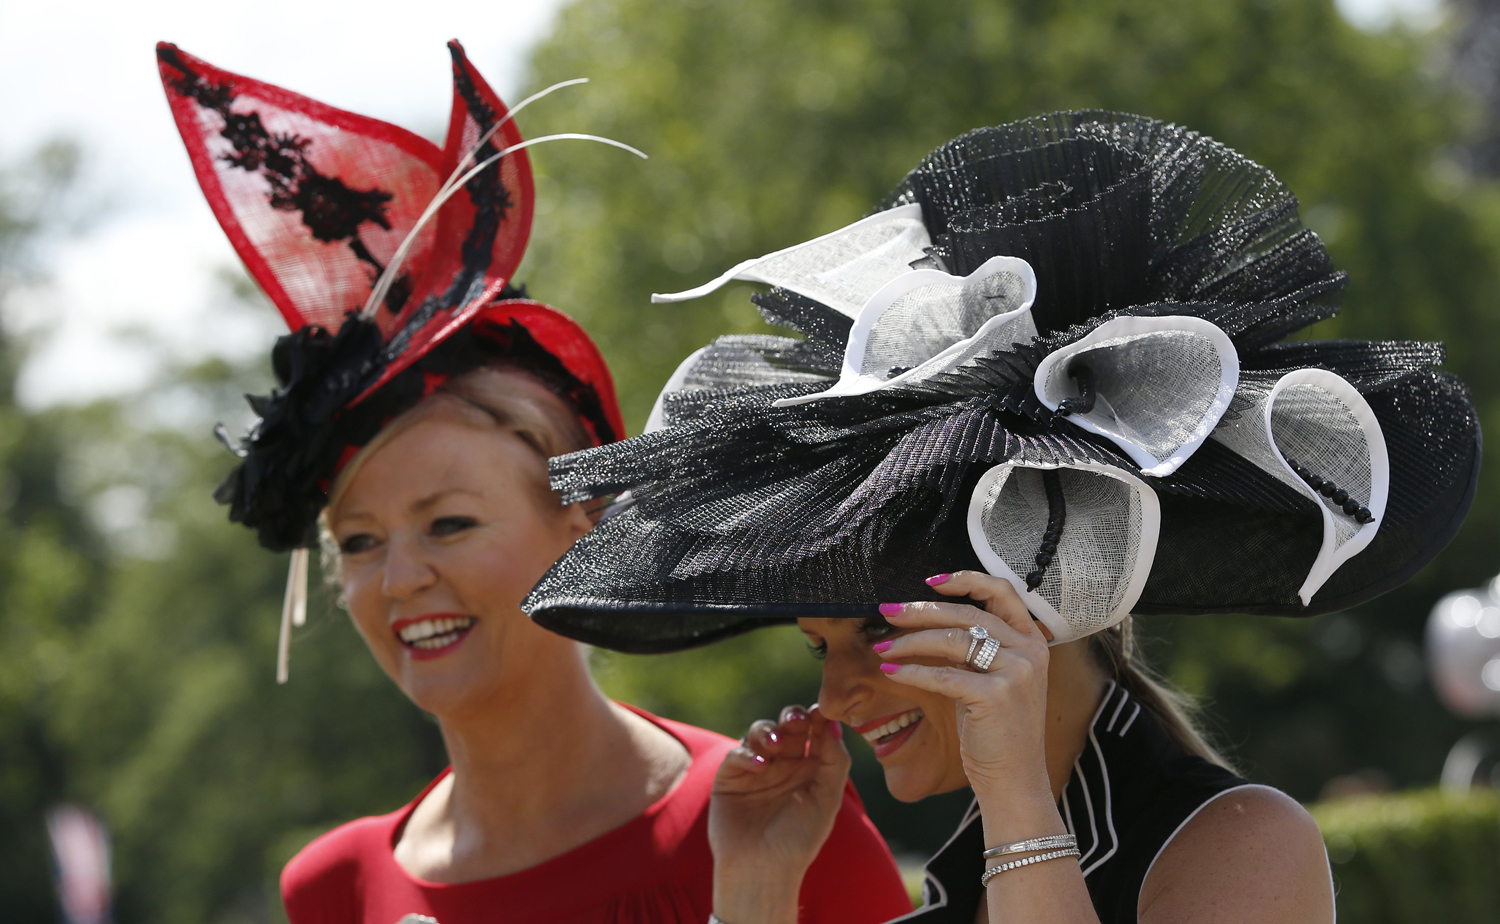 Race goers hang onto their hats in a gusty wind as they arrive on the first day of the Royal Ascot horse racing meeting at Ascot, England, June, 17, 2014.